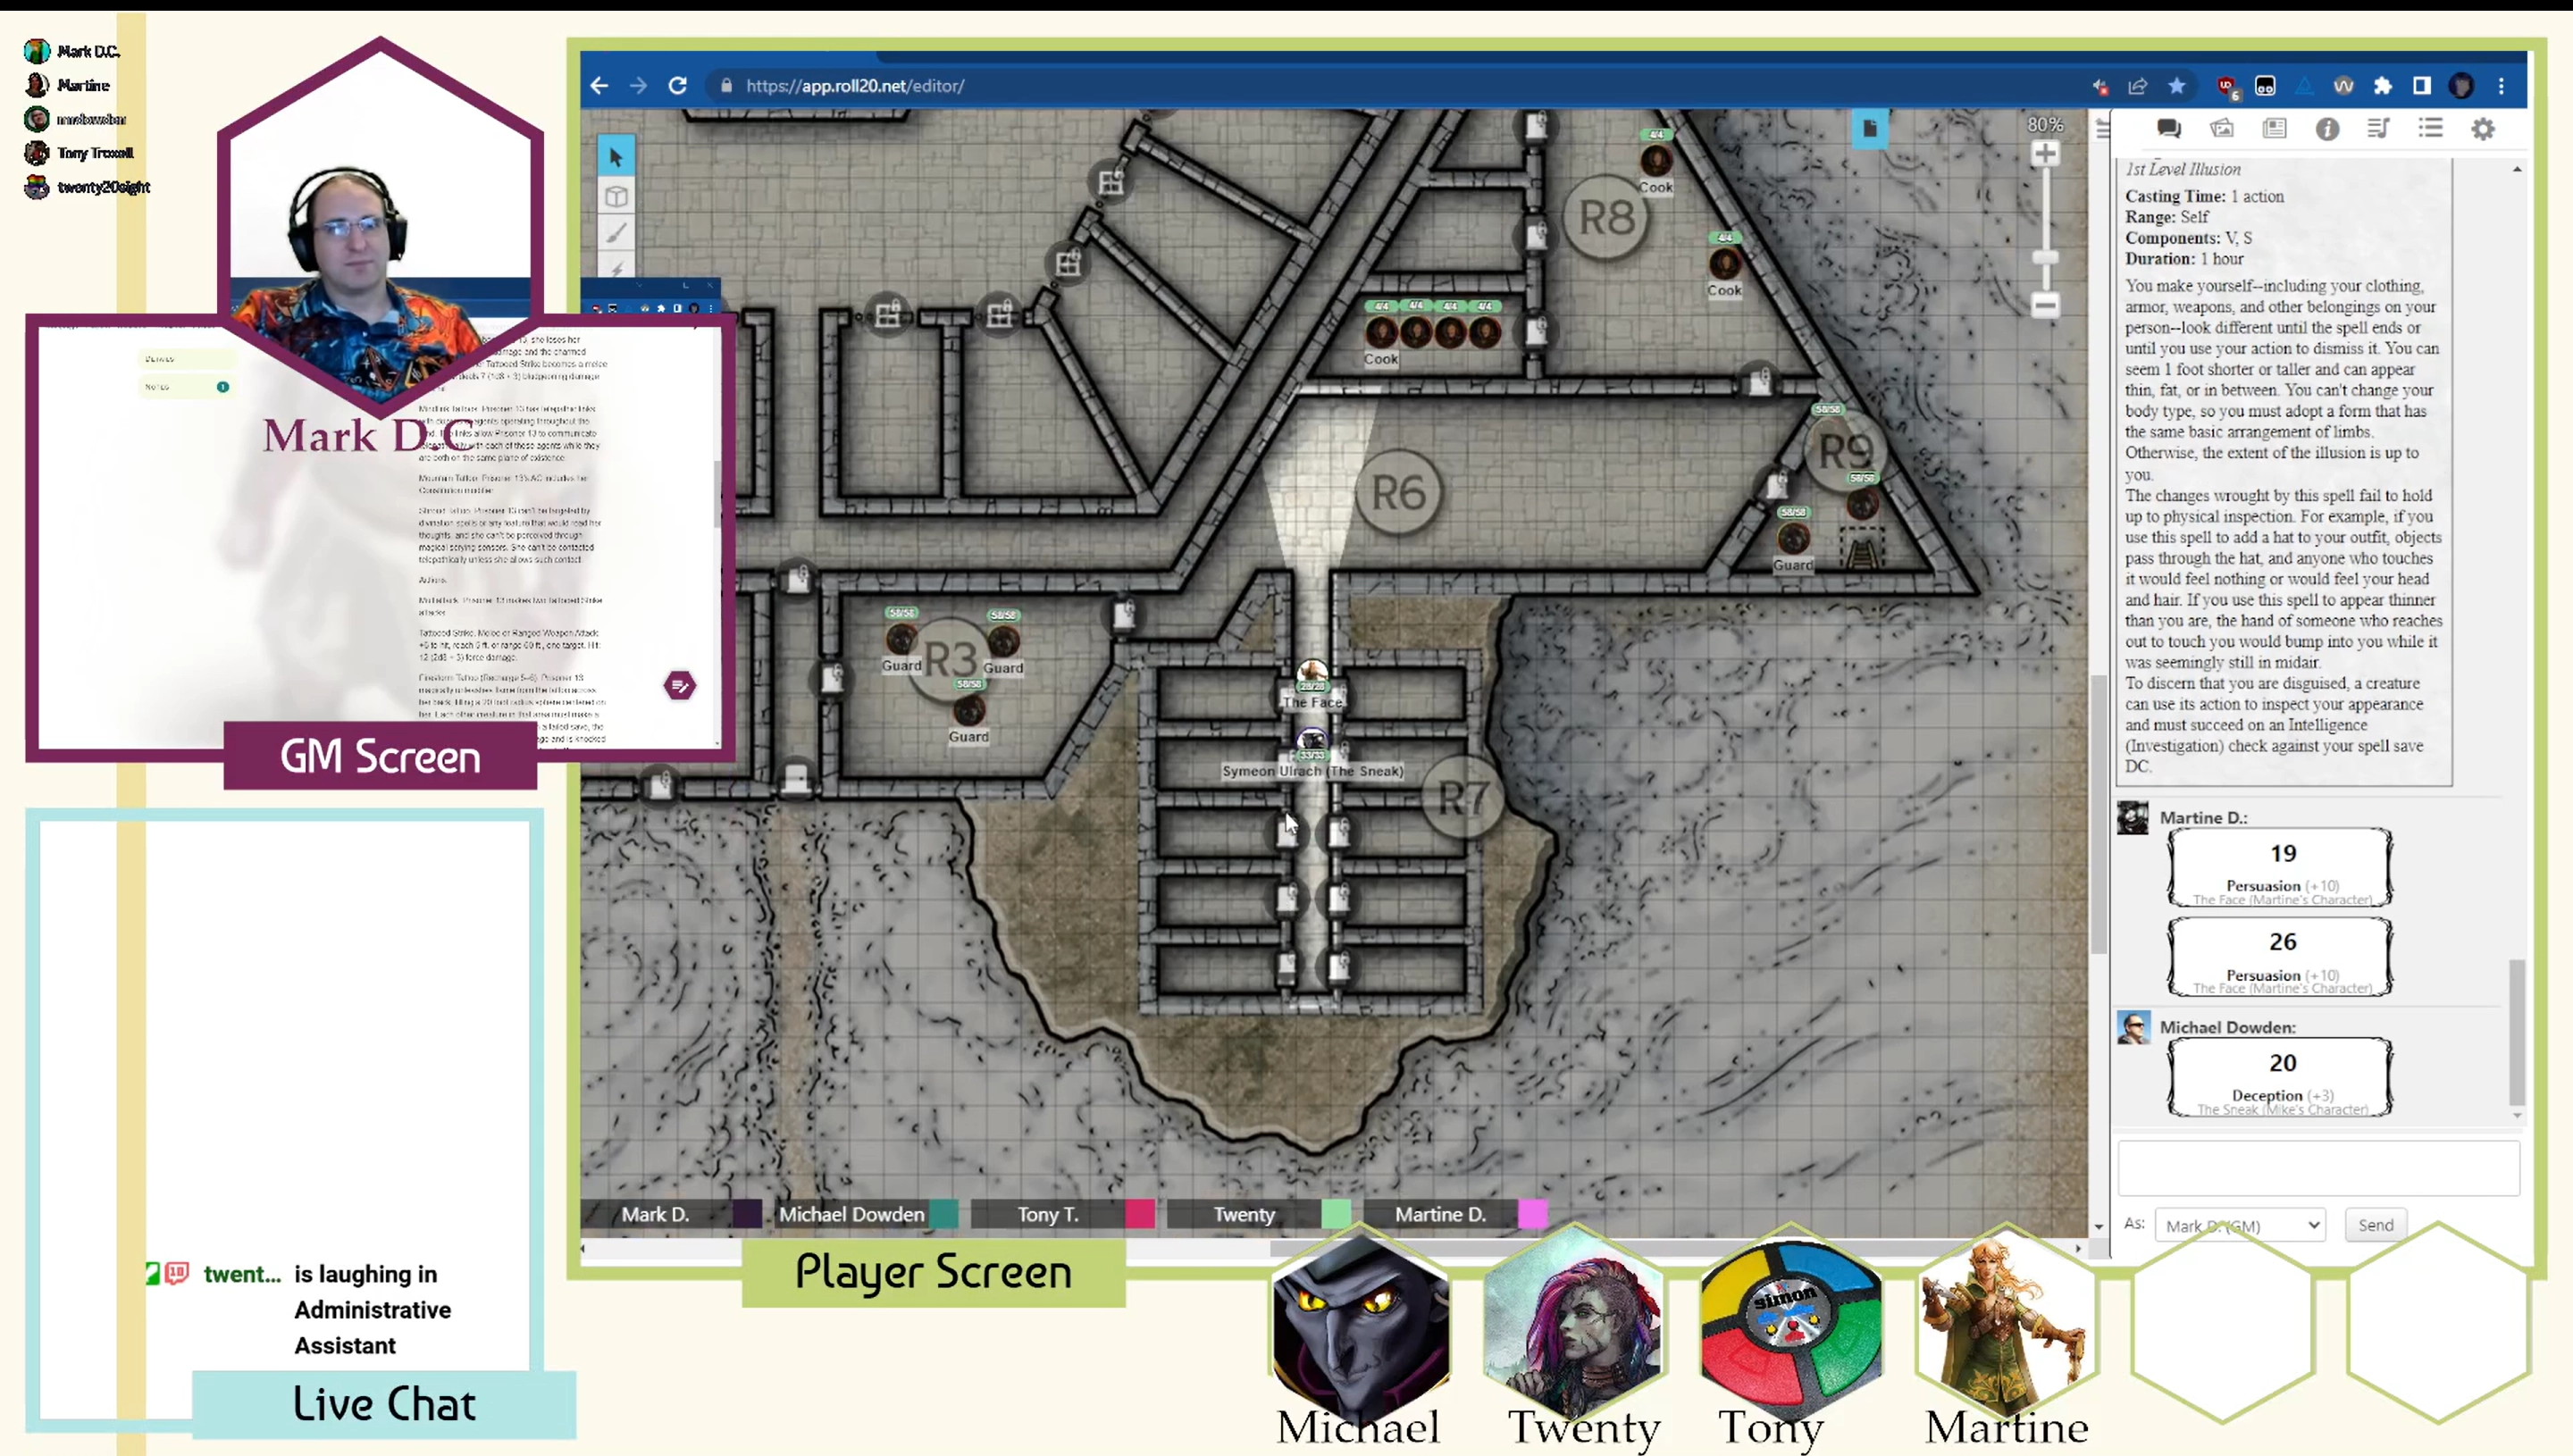 Mark GMs a game in the Roll 20 Virtual Table Top system. Four players are in the game (Michael, Martine, Twenty, and Tony). They are shown exploring a prison map. The Lore Link window shows Mark looking at the information about Prisoner 13.